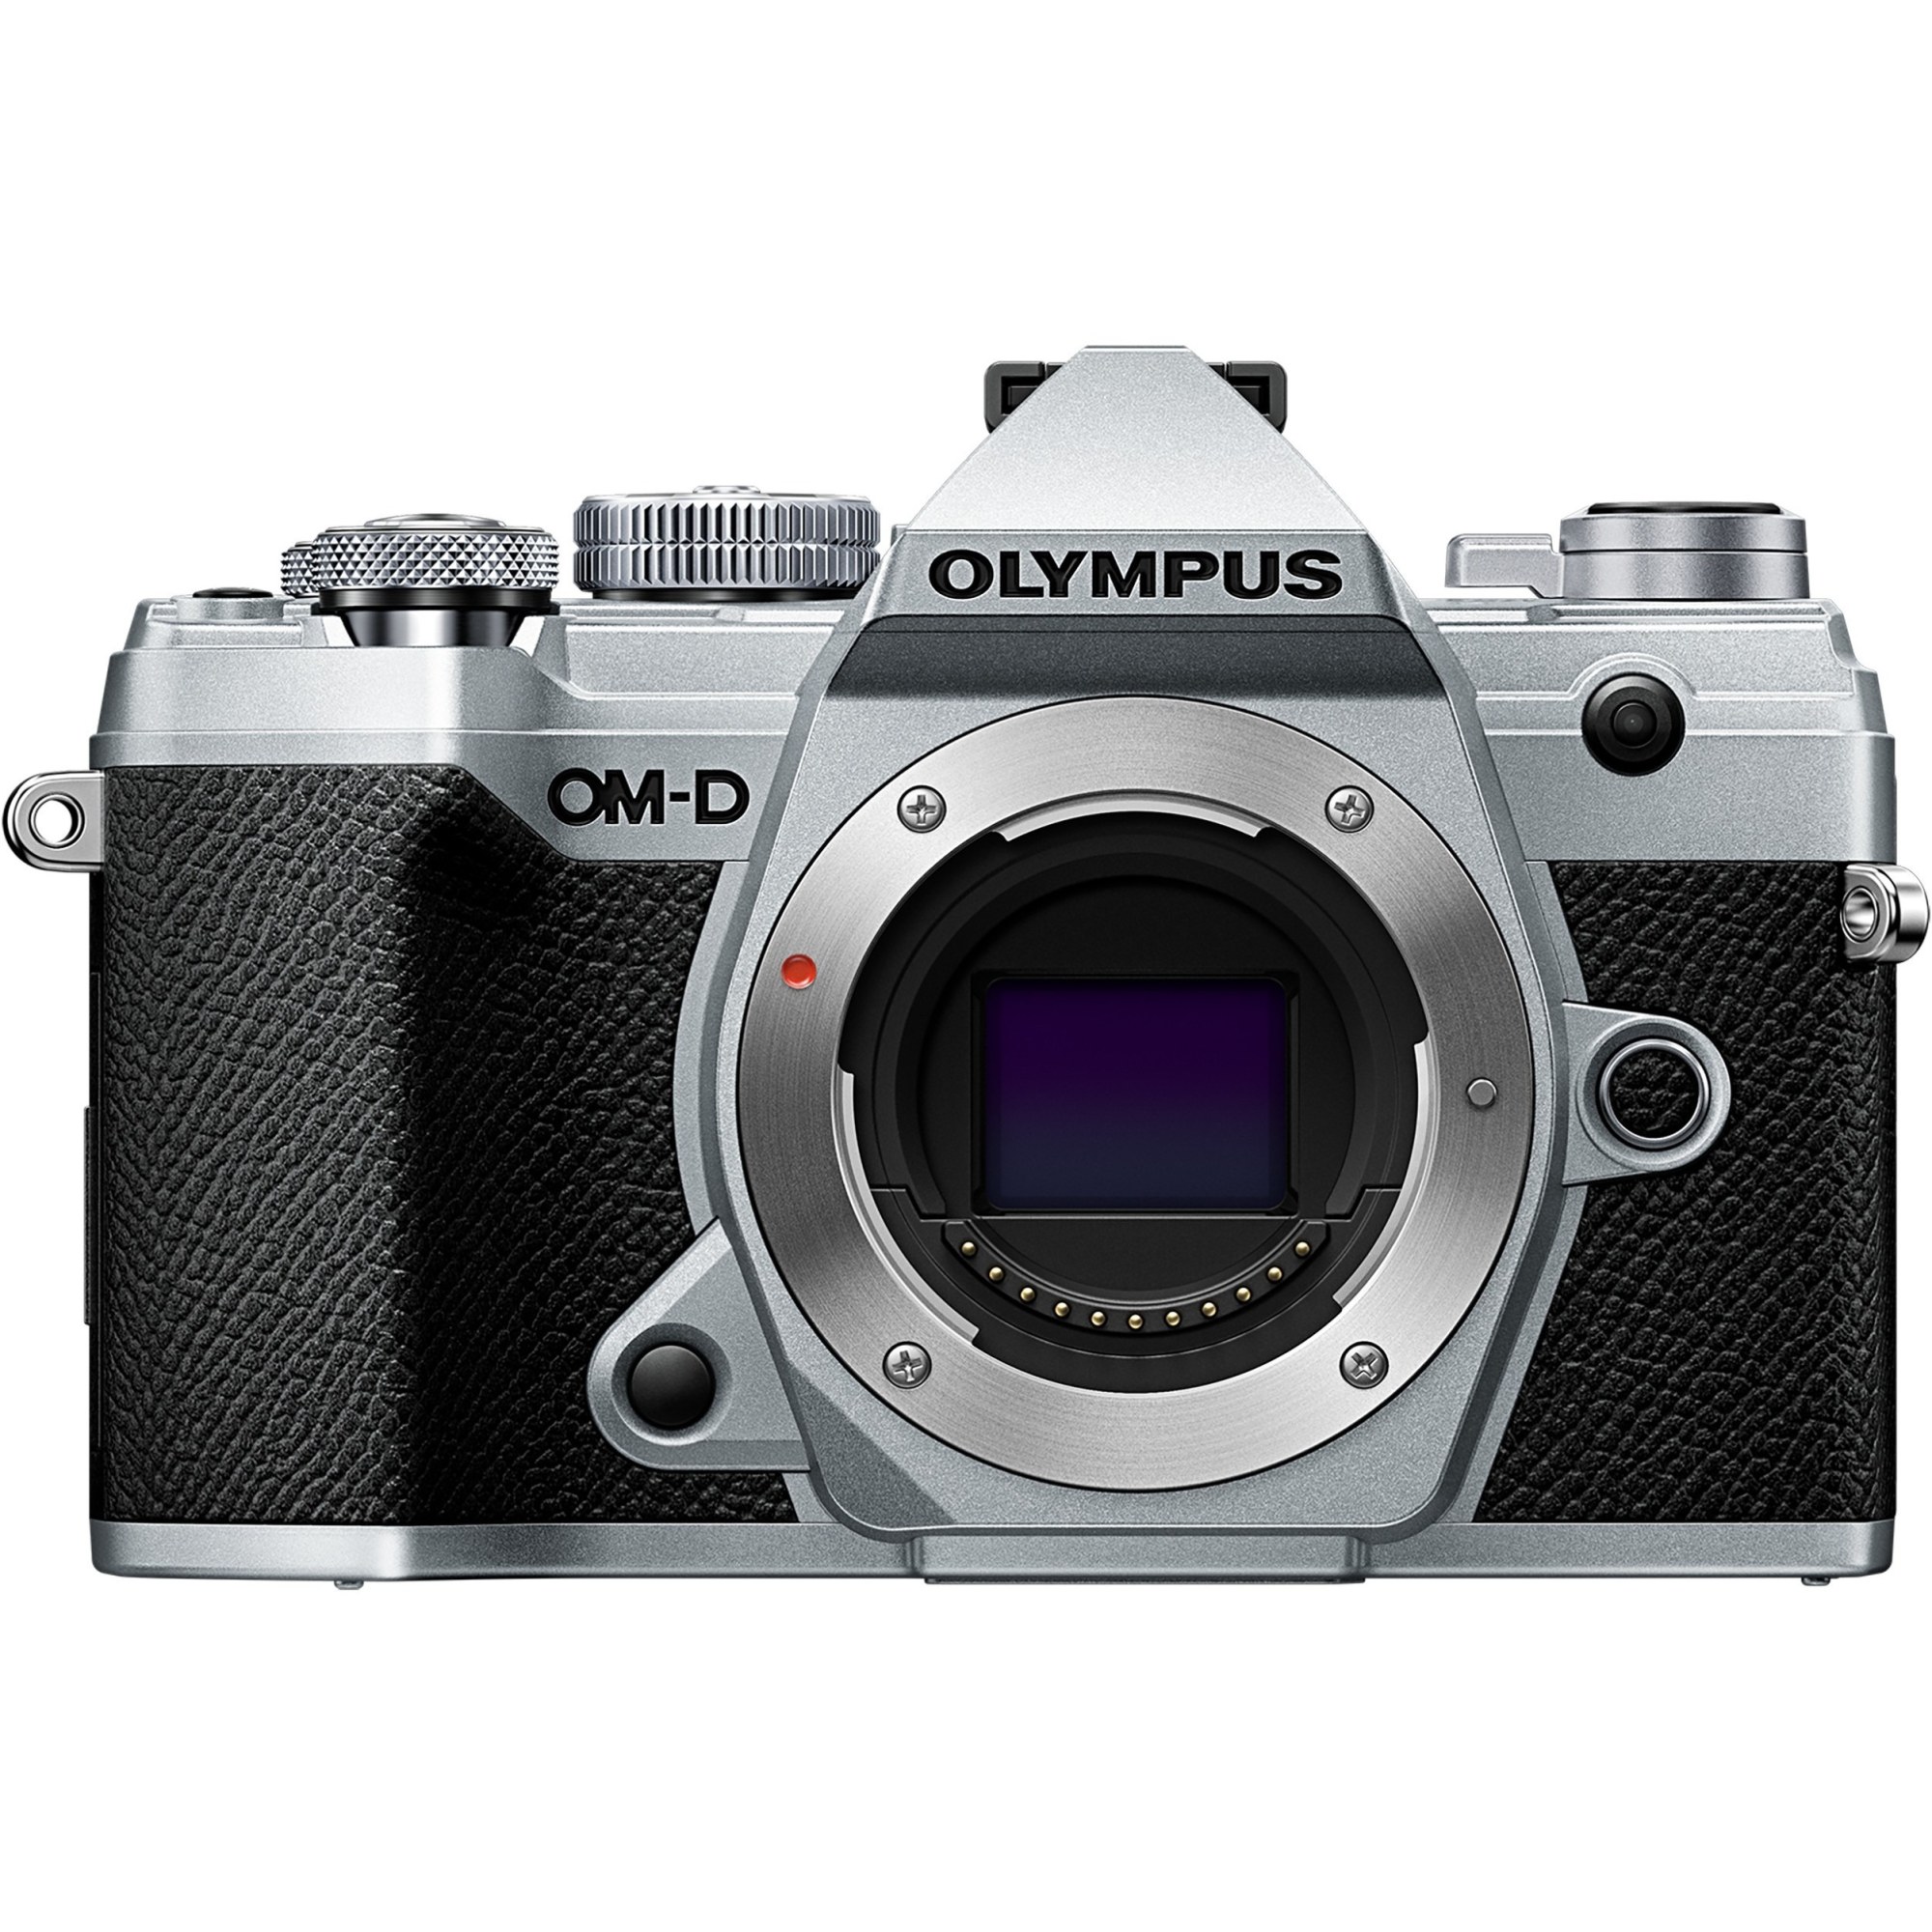 Olympus OM-D E-M5 Mark III - Digital camera - mirrorless - 20.4 MP - Four Thirds - 4K / 24 fps - body only - Wi-Fi, Bluetooth - silver - image 2 of 8